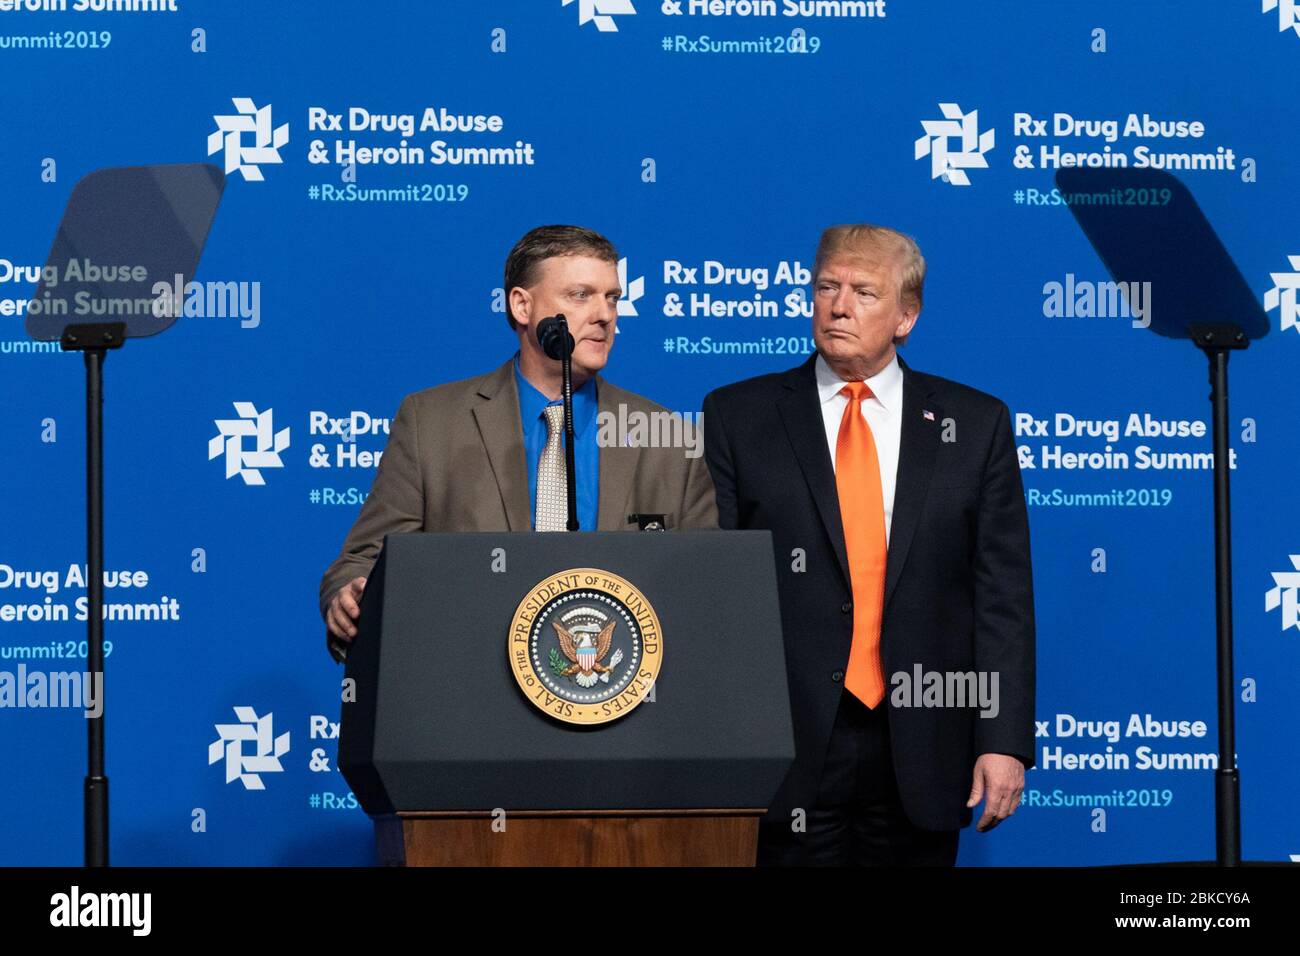 President Donald J. Trump listens as Virginia State Police Senior Special Agent Ervin Thomas Murphy speaks about his son Matthew Jason Murphy who died of an opioid overdose, during his remarks at the Rx Drug Abuse and Heroin summit Wednesday, April 24, 2019, at the Hyatt Regency Atlanta. The Rx Drug Abuse and Heroin Summit Stock Photo